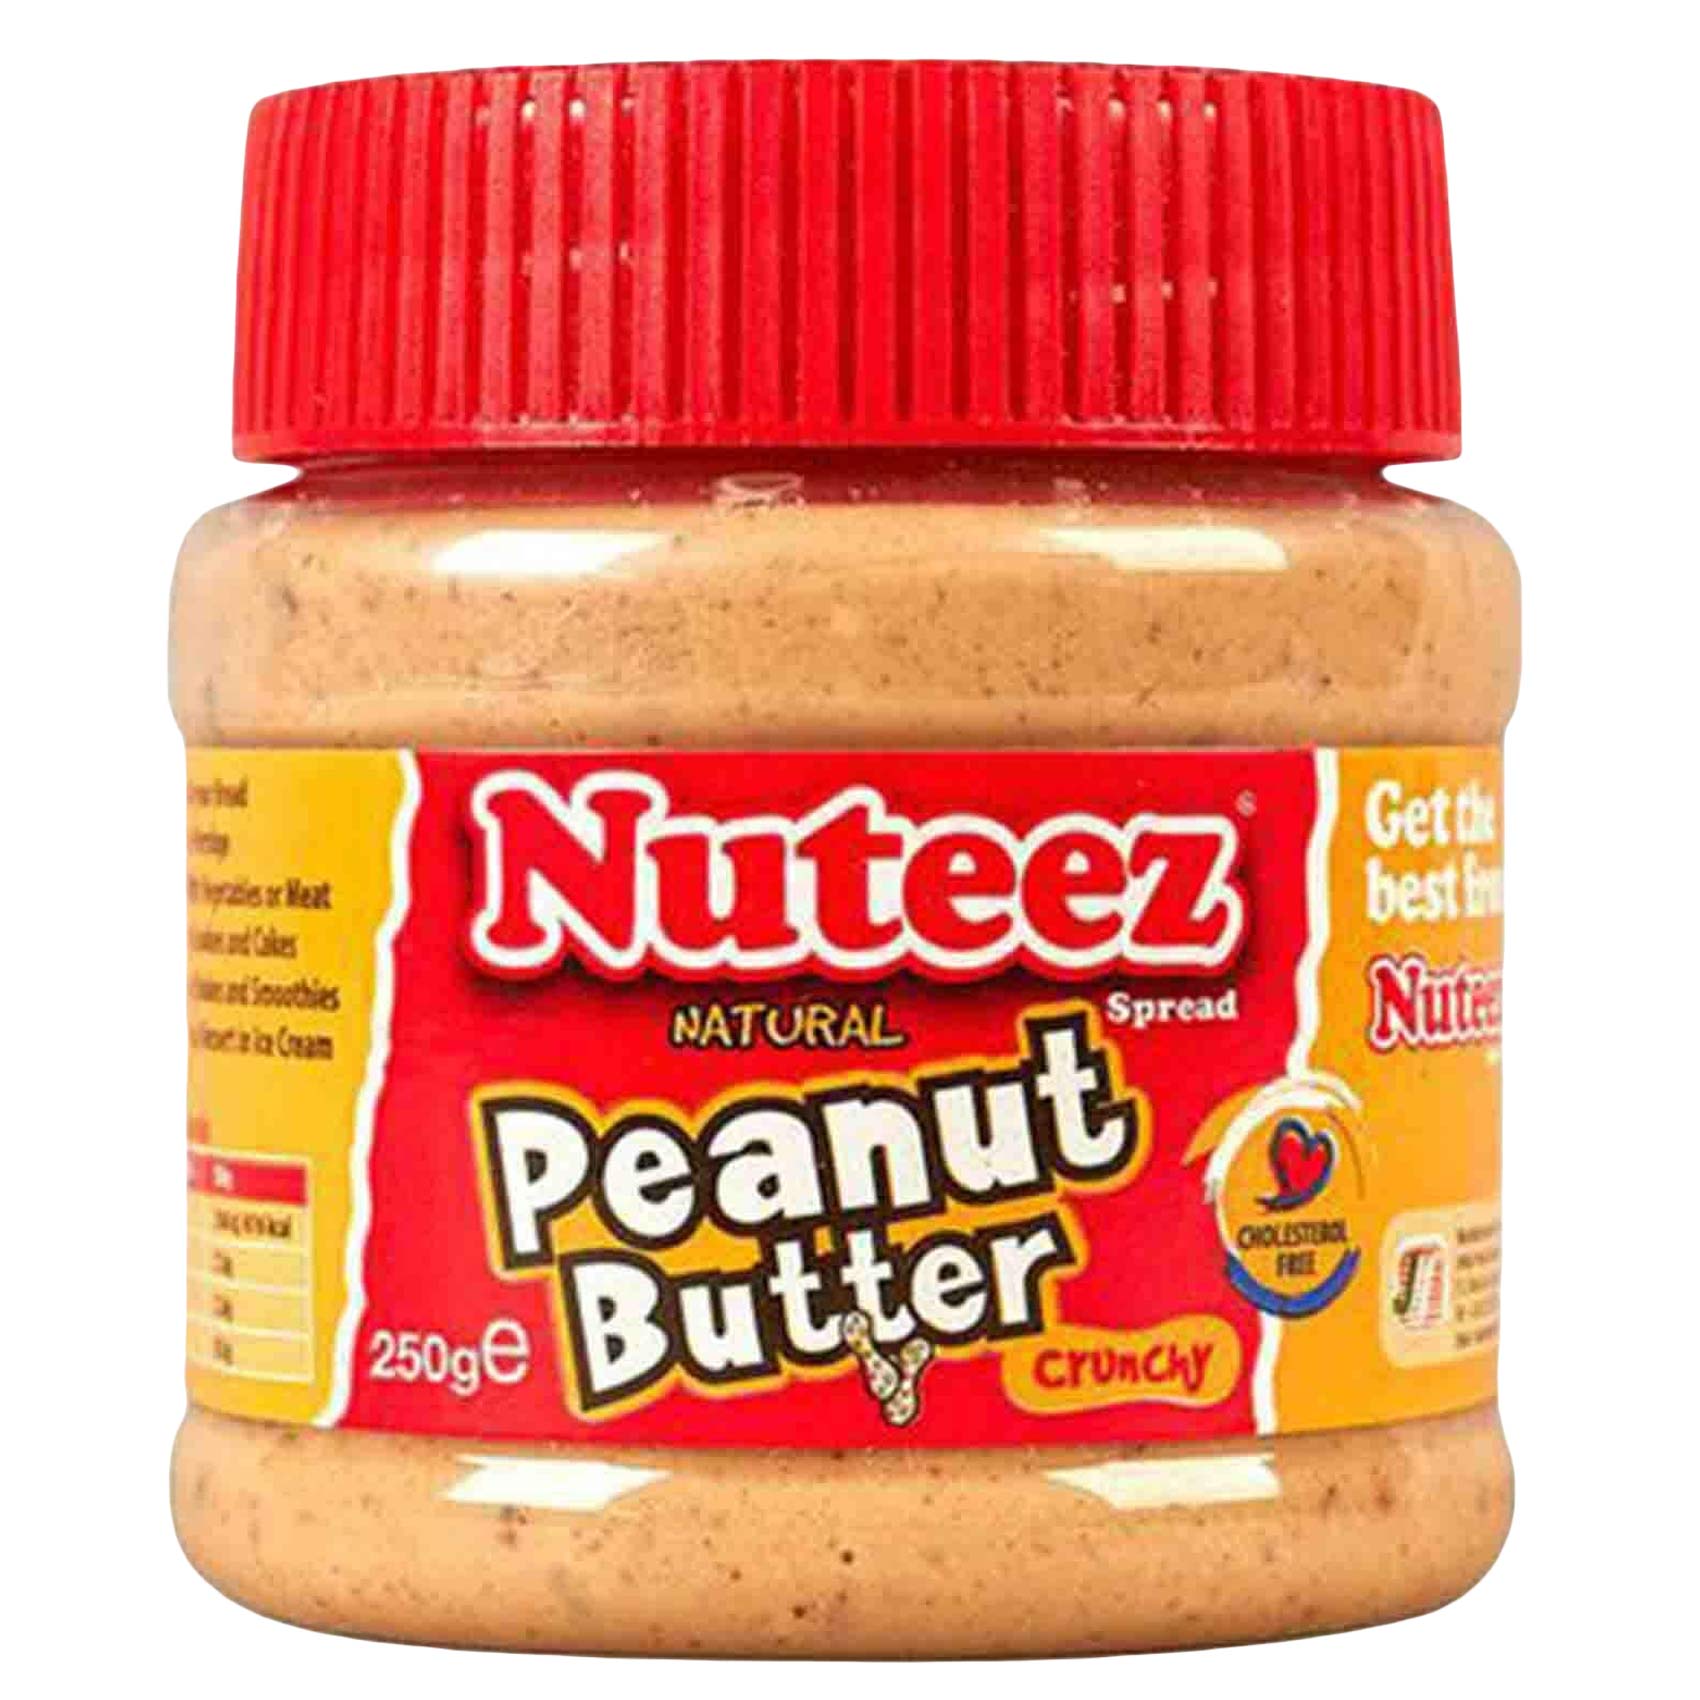 Nuteez Natural Crunchy Peanut Butter 250g